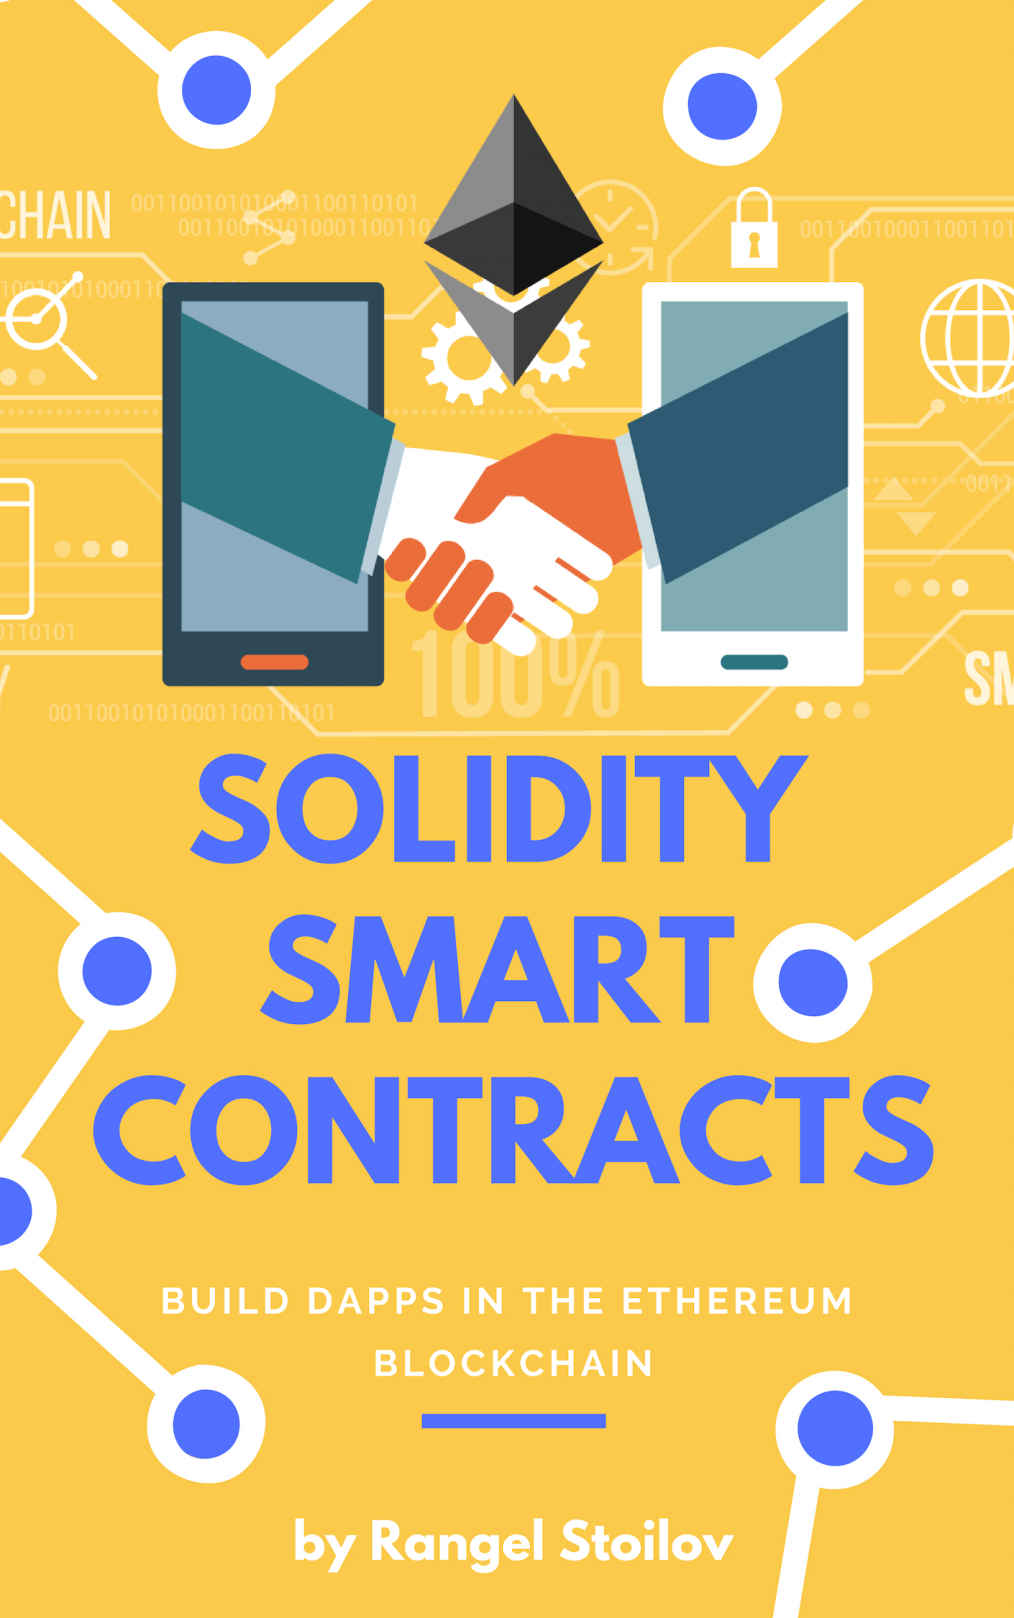 FREE: Solidity Smart Contracts: Build DApps In Ethereum Blockchain by rangelstoilov@gmail.com